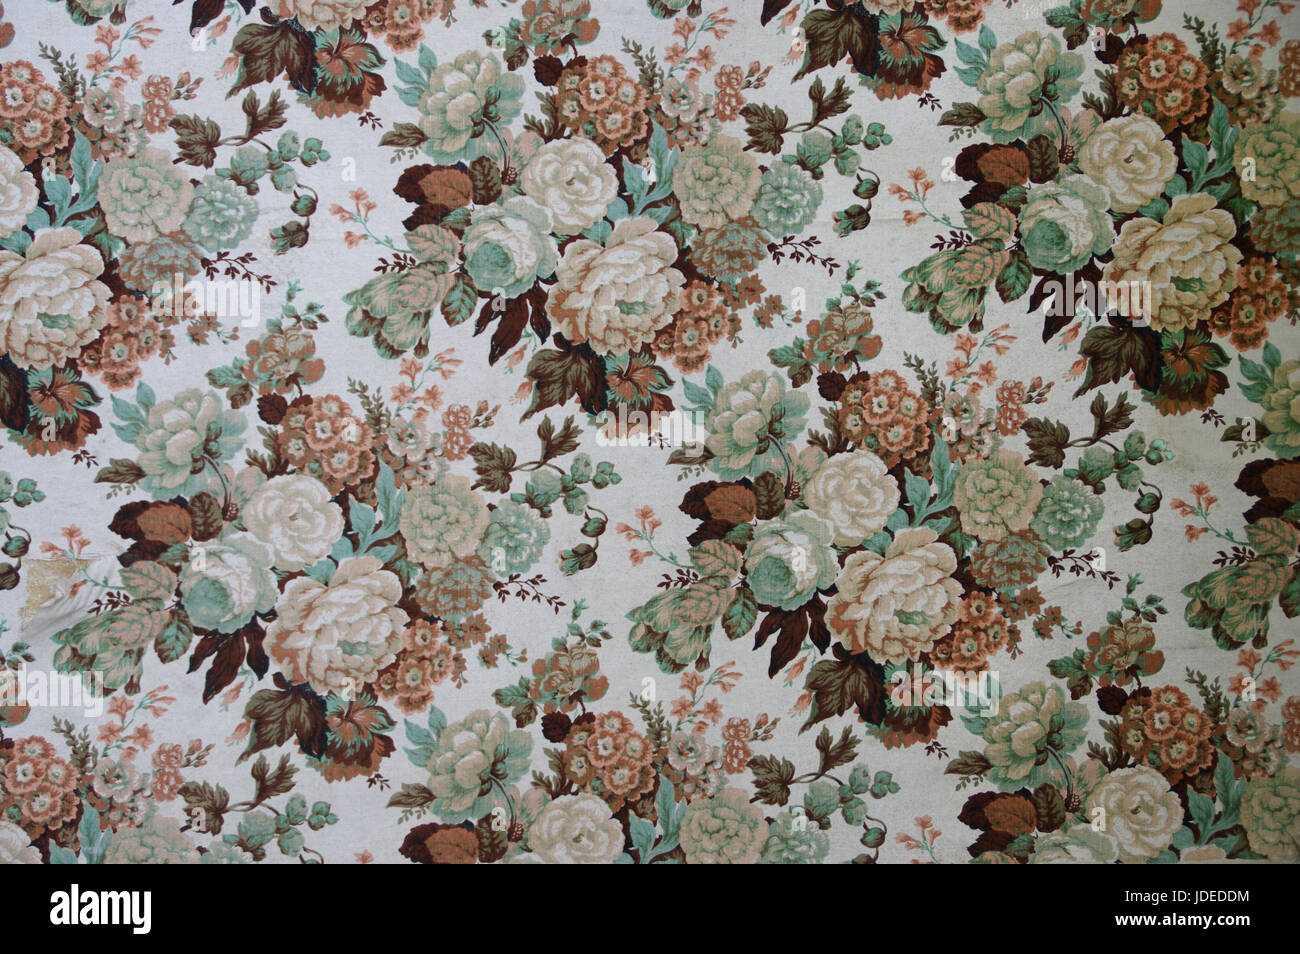 Vintage seamless pattern on wall. Retro floral ornament wallpaper. Stock Photo